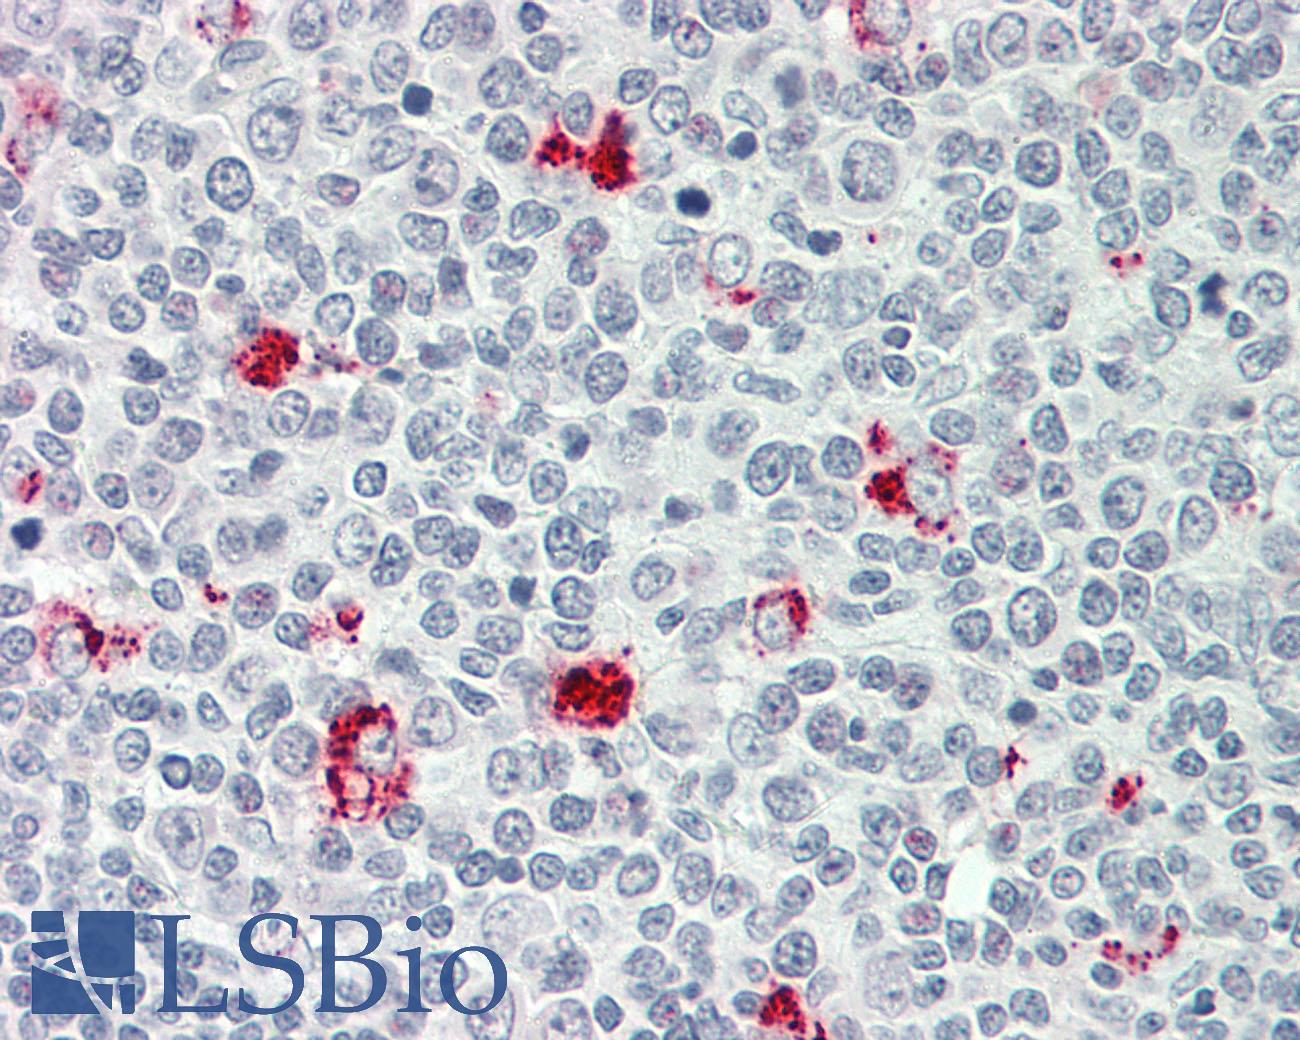 P2RY11 / P2Y11 Antibody - Human Tonsil: Formalin-Fixed, Paraffin-Embedded (FFPE)